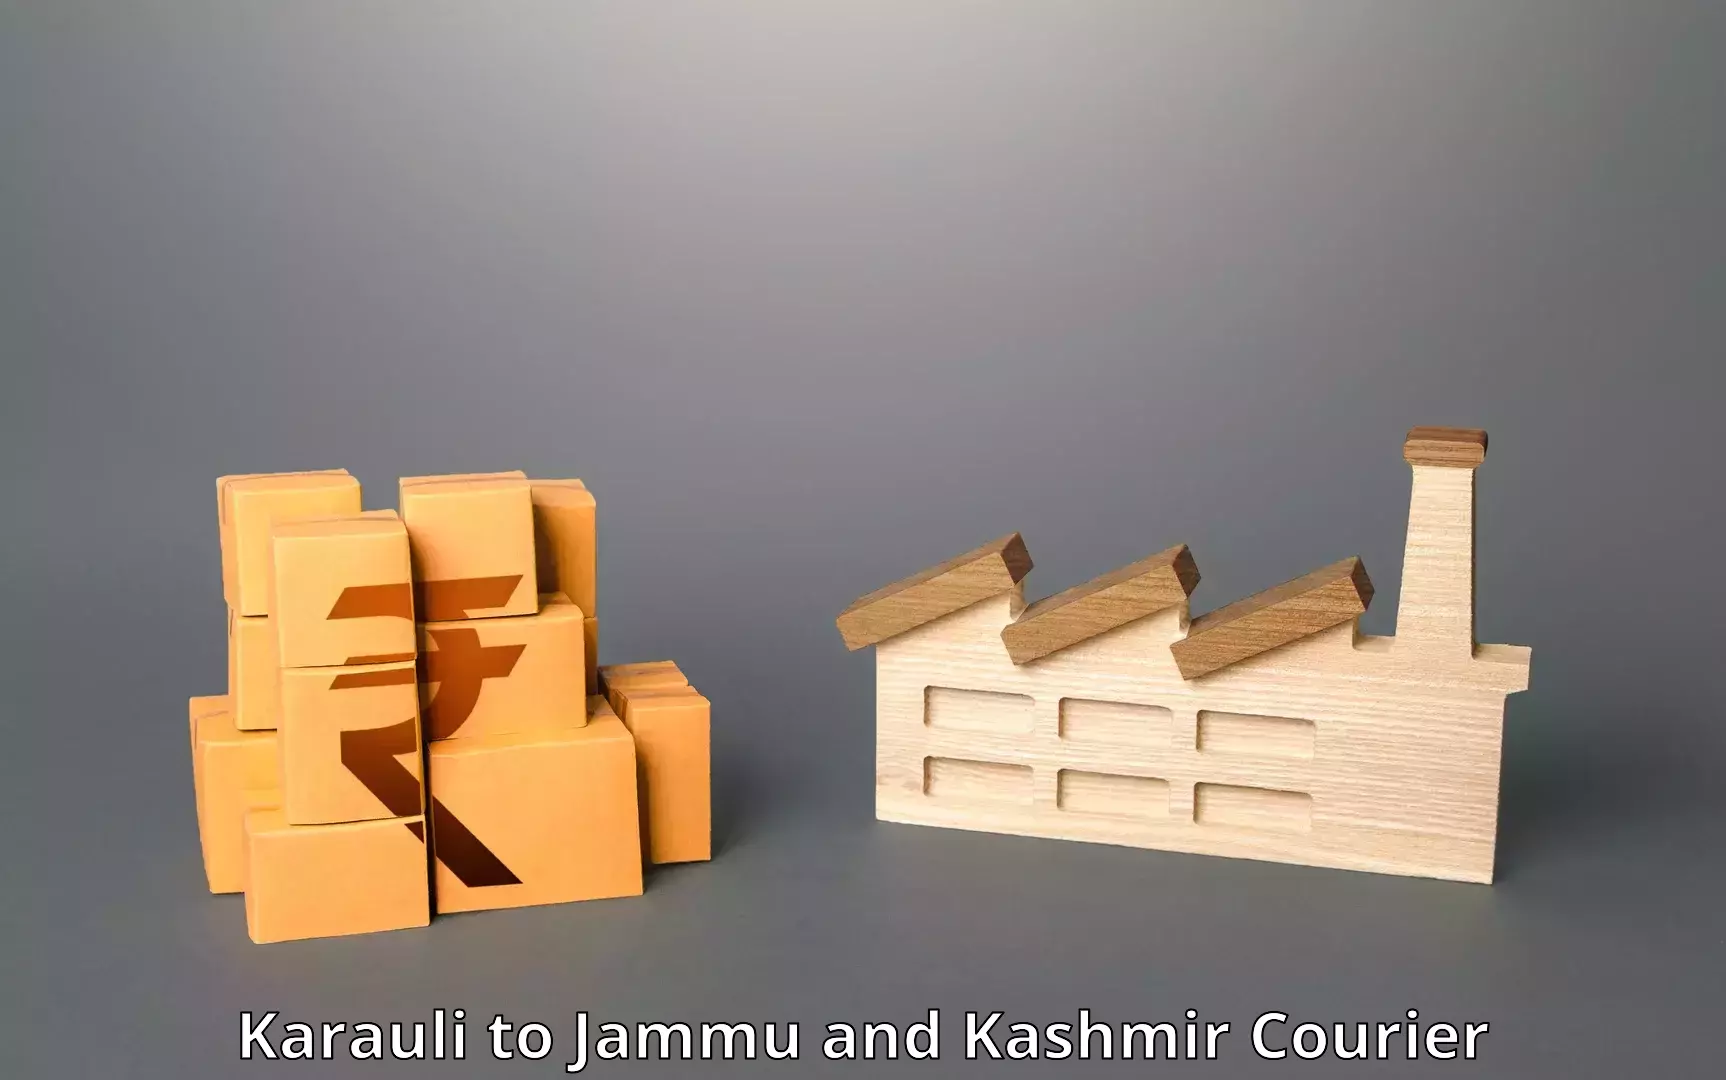 Reliable delivery network Karauli to Jammu and Kashmir